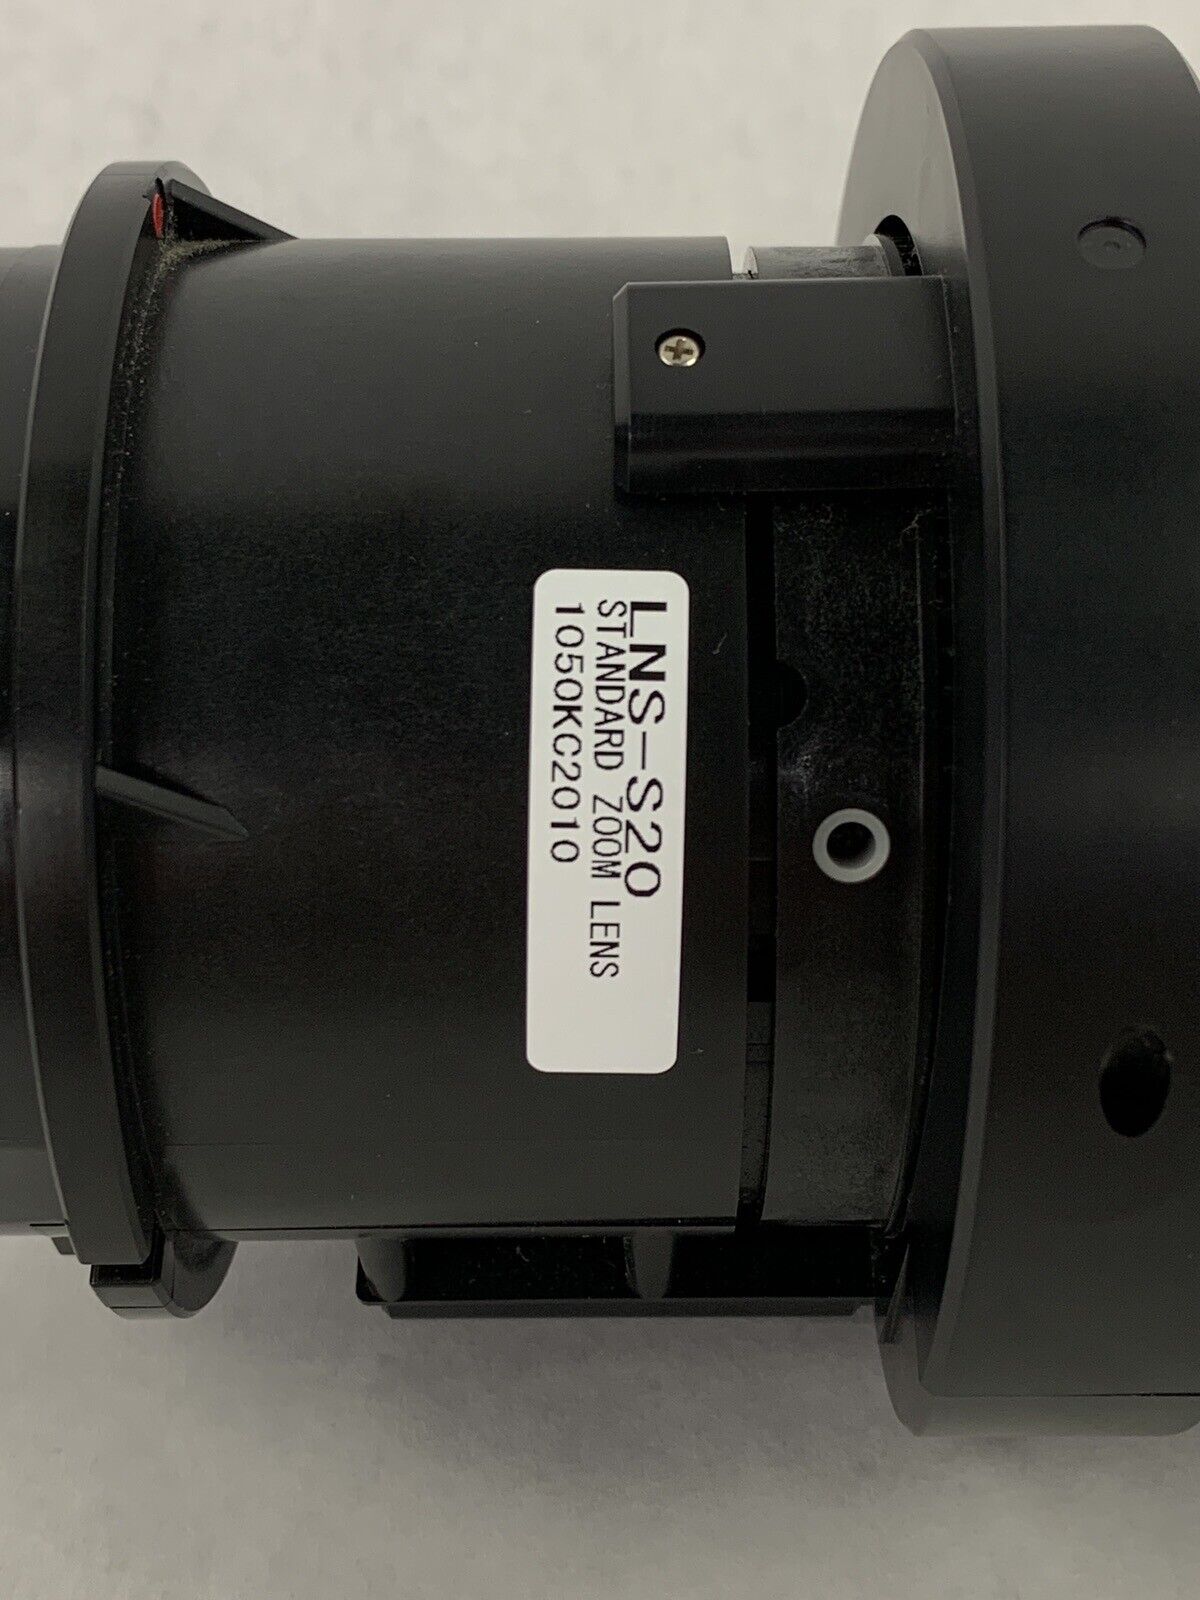 Sanyo LNS-S20 Zoom Projector Lens From Panasonic PLC-WM4500 Tested